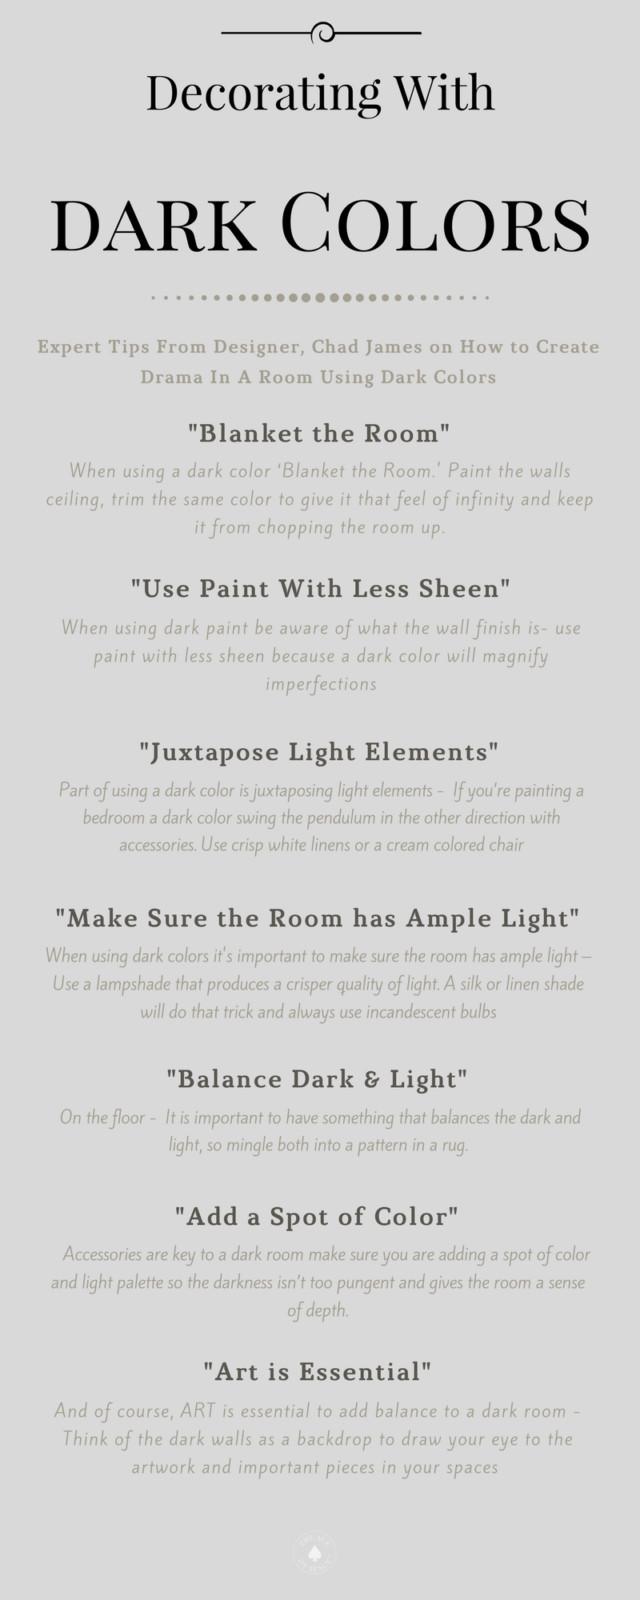 7 Expert Tips For Decorating With Dark Colors, Chad James Group